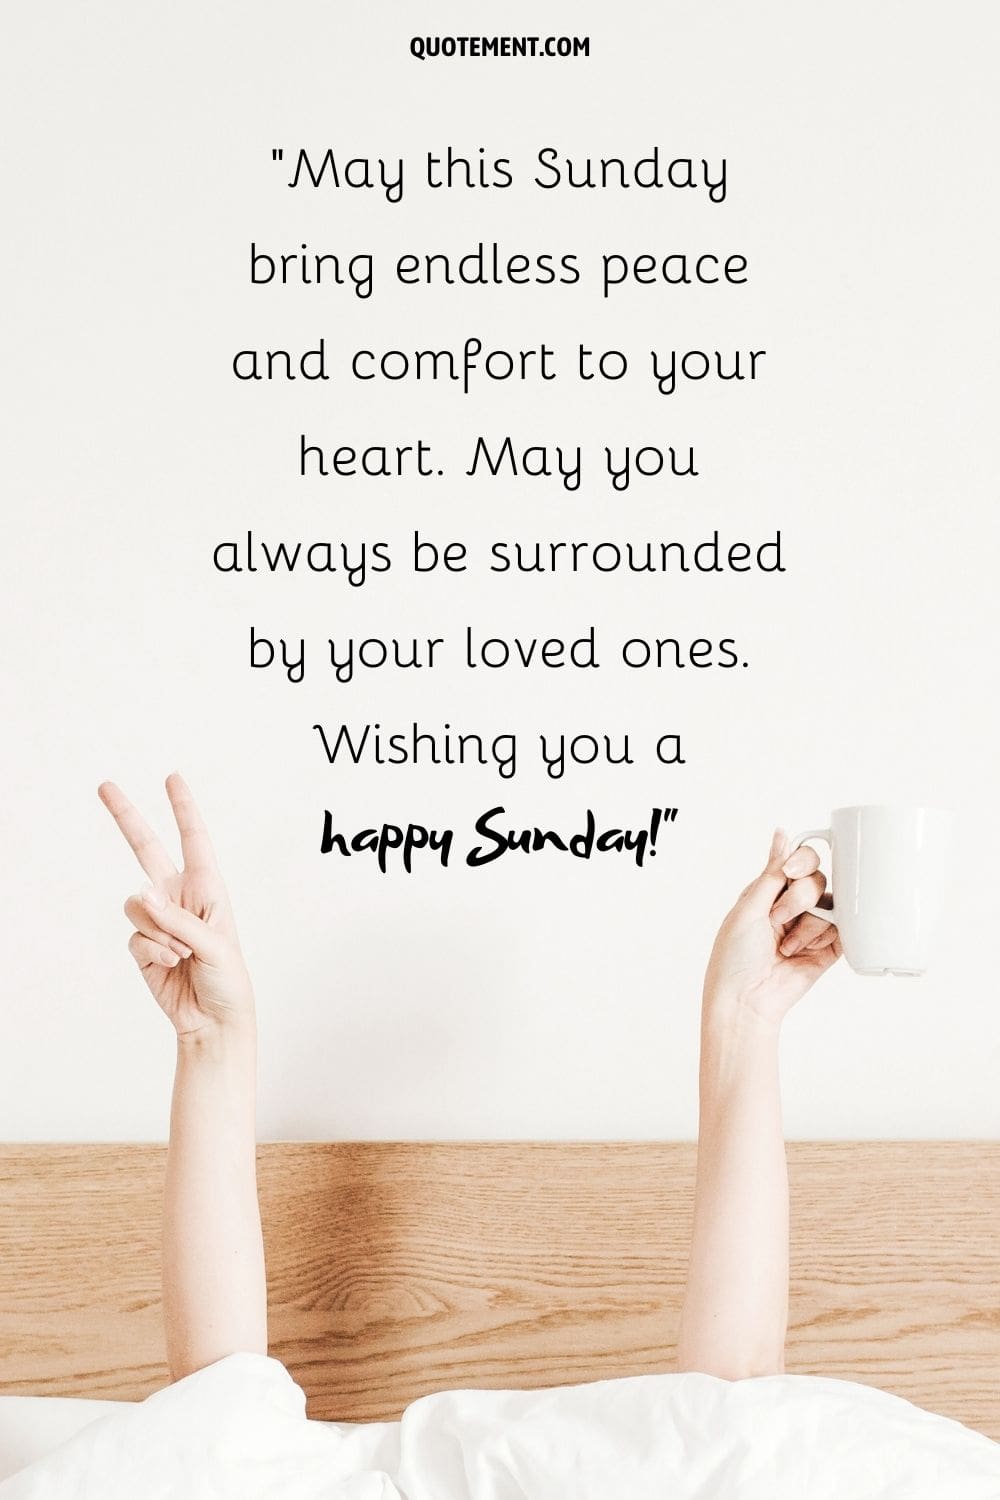 hand in a peace sign and holding a coffee mug representing happy sunday message